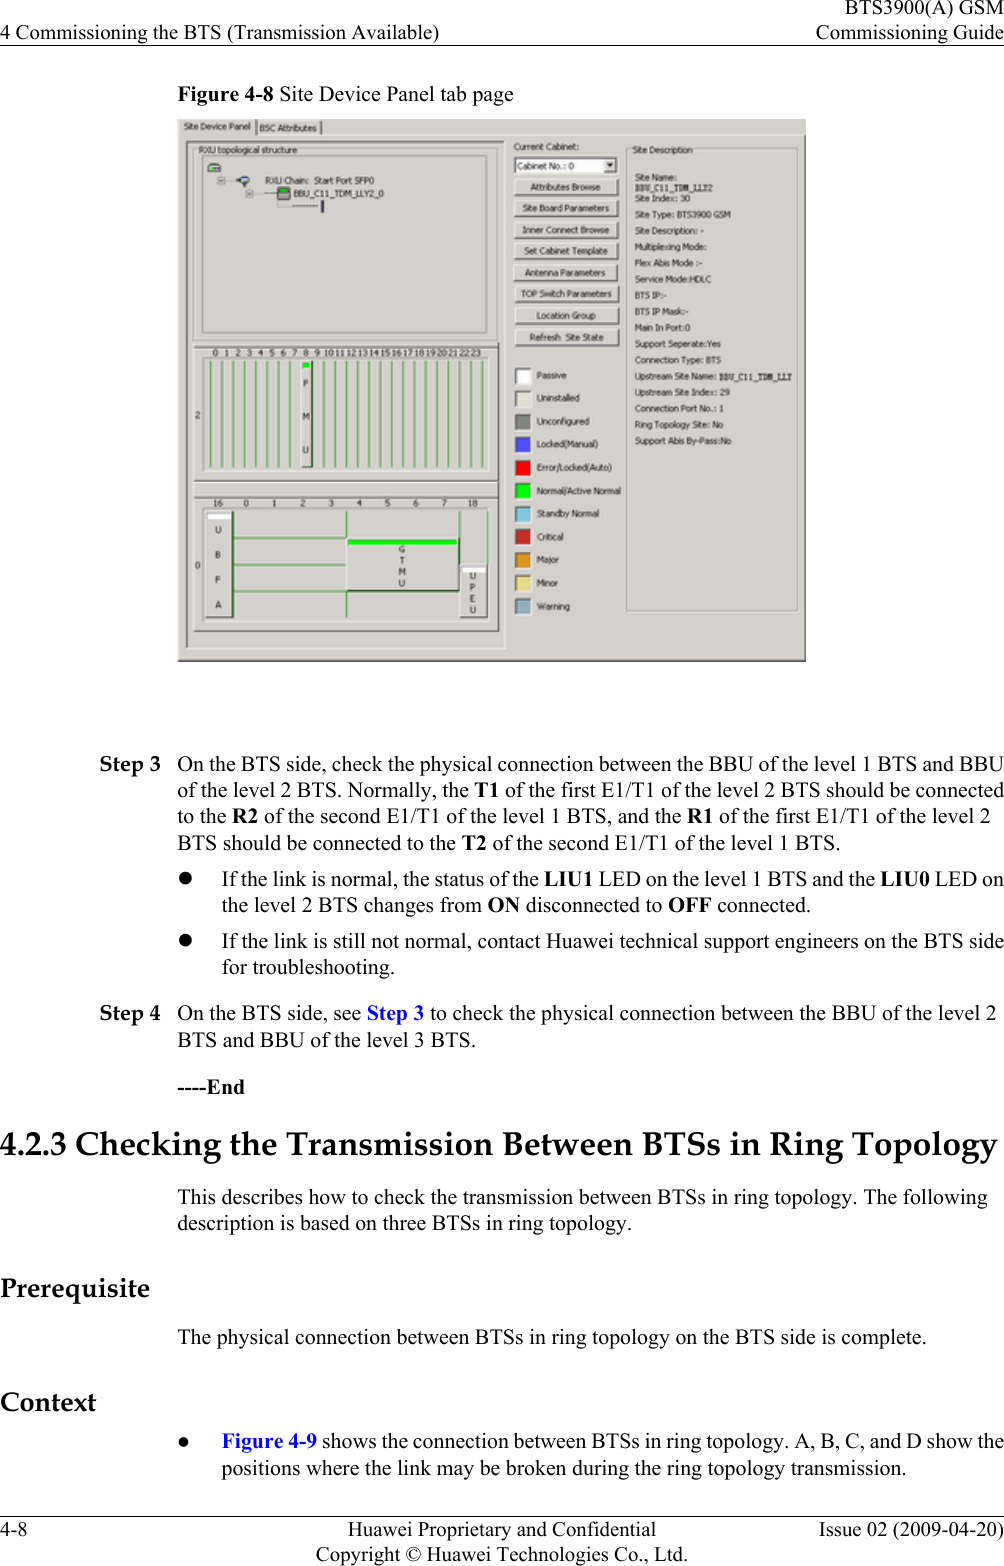 Figure 4-8 Site Device Panel tab page Step 3 On the BTS side, check the physical connection between the BBU of the level 1 BTS and BBUof the level 2 BTS. Normally, the T1 of the first E1/T1 of the level 2 BTS should be connectedto the R2 of the second E1/T1 of the level 1 BTS, and the R1 of the first E1/T1 of the level 2BTS should be connected to the T2 of the second E1/T1 of the level 1 BTS.lIf the link is normal, the status of the LIU1 LED on the level 1 BTS and the LIU0 LED onthe level 2 BTS changes from ON disconnected to OFF connected.lIf the link is still not normal, contact Huawei technical support engineers on the BTS sidefor troubleshooting.Step 4 On the BTS side, see Step 3 to check the physical connection between the BBU of the level 2BTS and BBU of the level 3 BTS.----End4.2.3 Checking the Transmission Between BTSs in Ring TopologyThis describes how to check the transmission between BTSs in ring topology. The followingdescription is based on three BTSs in ring topology.PrerequisiteThe physical connection between BTSs in ring topology on the BTS side is complete.ContextlFigure 4-9 shows the connection between BTSs in ring topology. A, B, C, and D show thepositions where the link may be broken during the ring topology transmission.4 Commissioning the BTS (Transmission Available)BTS3900(A) GSMCommissioning Guide4-8 Huawei Proprietary and ConfidentialCopyright © Huawei Technologies Co., Ltd.Issue 02 (2009-04-20)